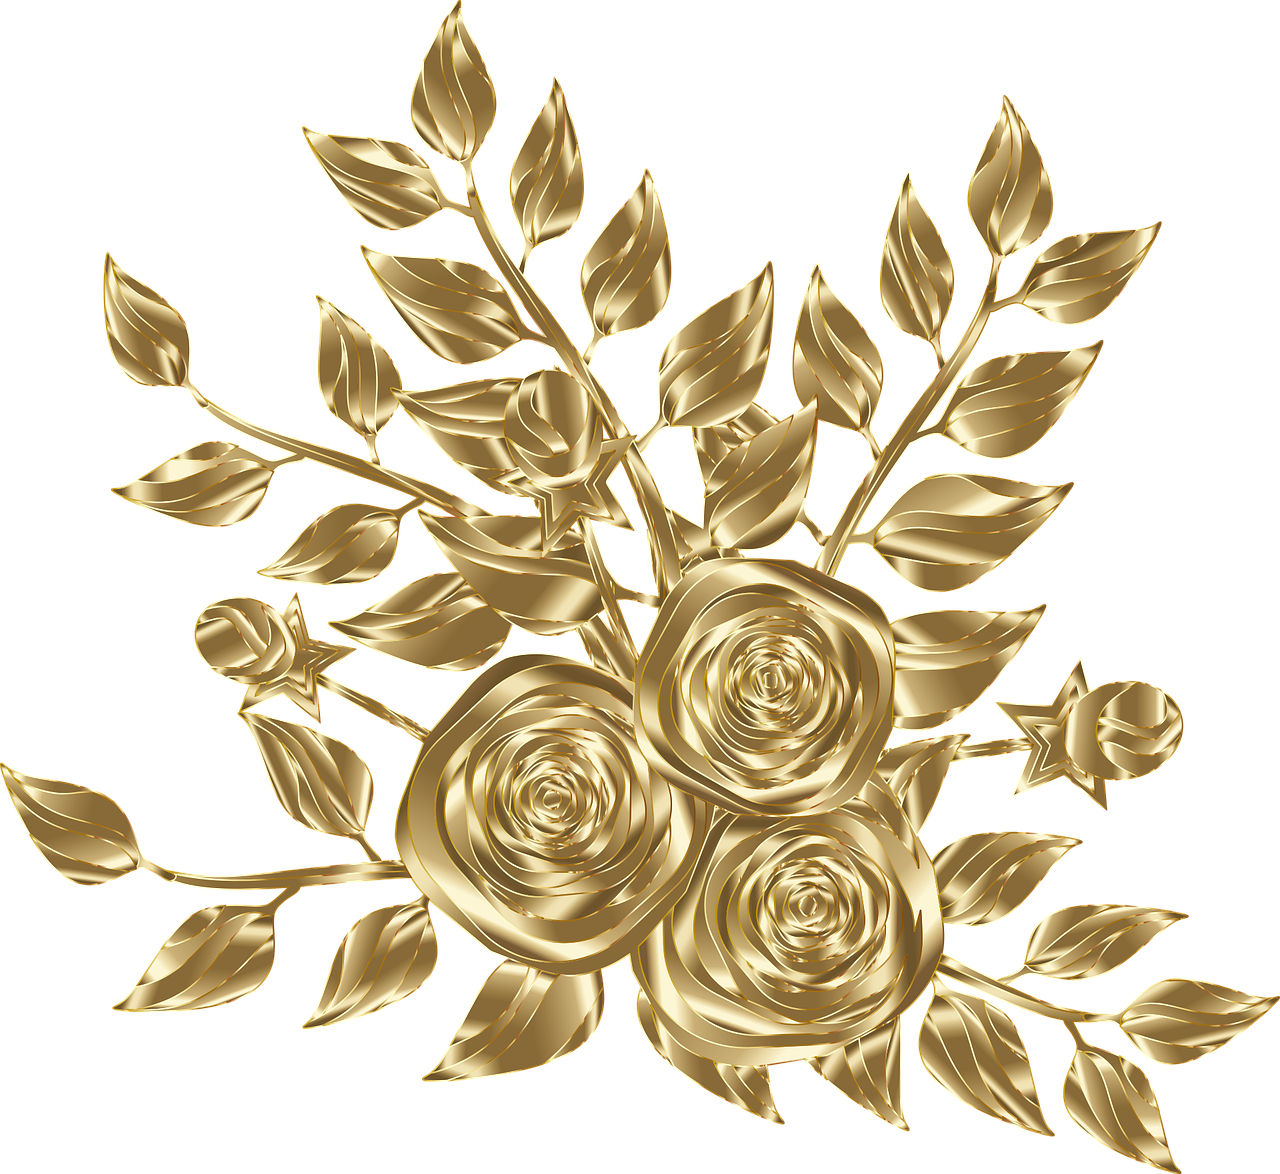 a bouquet of gold roses on a black background, a digital rendering, inspired by Gustav Doré, laurels of glory, metal art, intricate art deco leaf designs, golden wood carved in relief